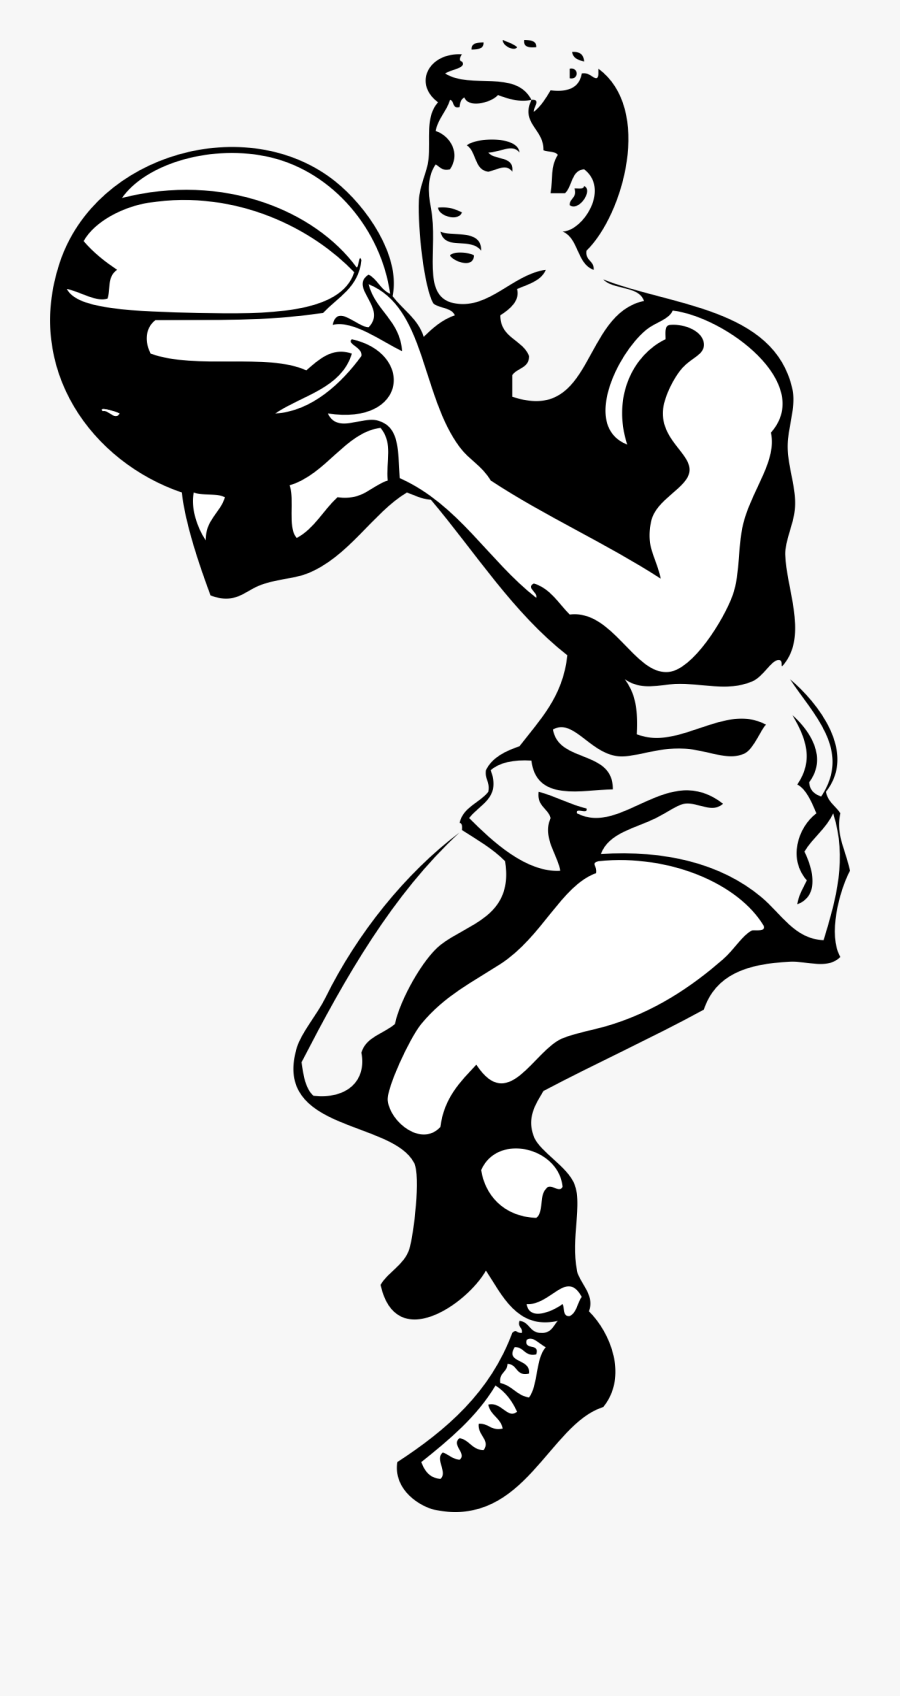 Black And White Images Basketball Clipart - Play Basketball Clipart Black And White, Transparent Clipart